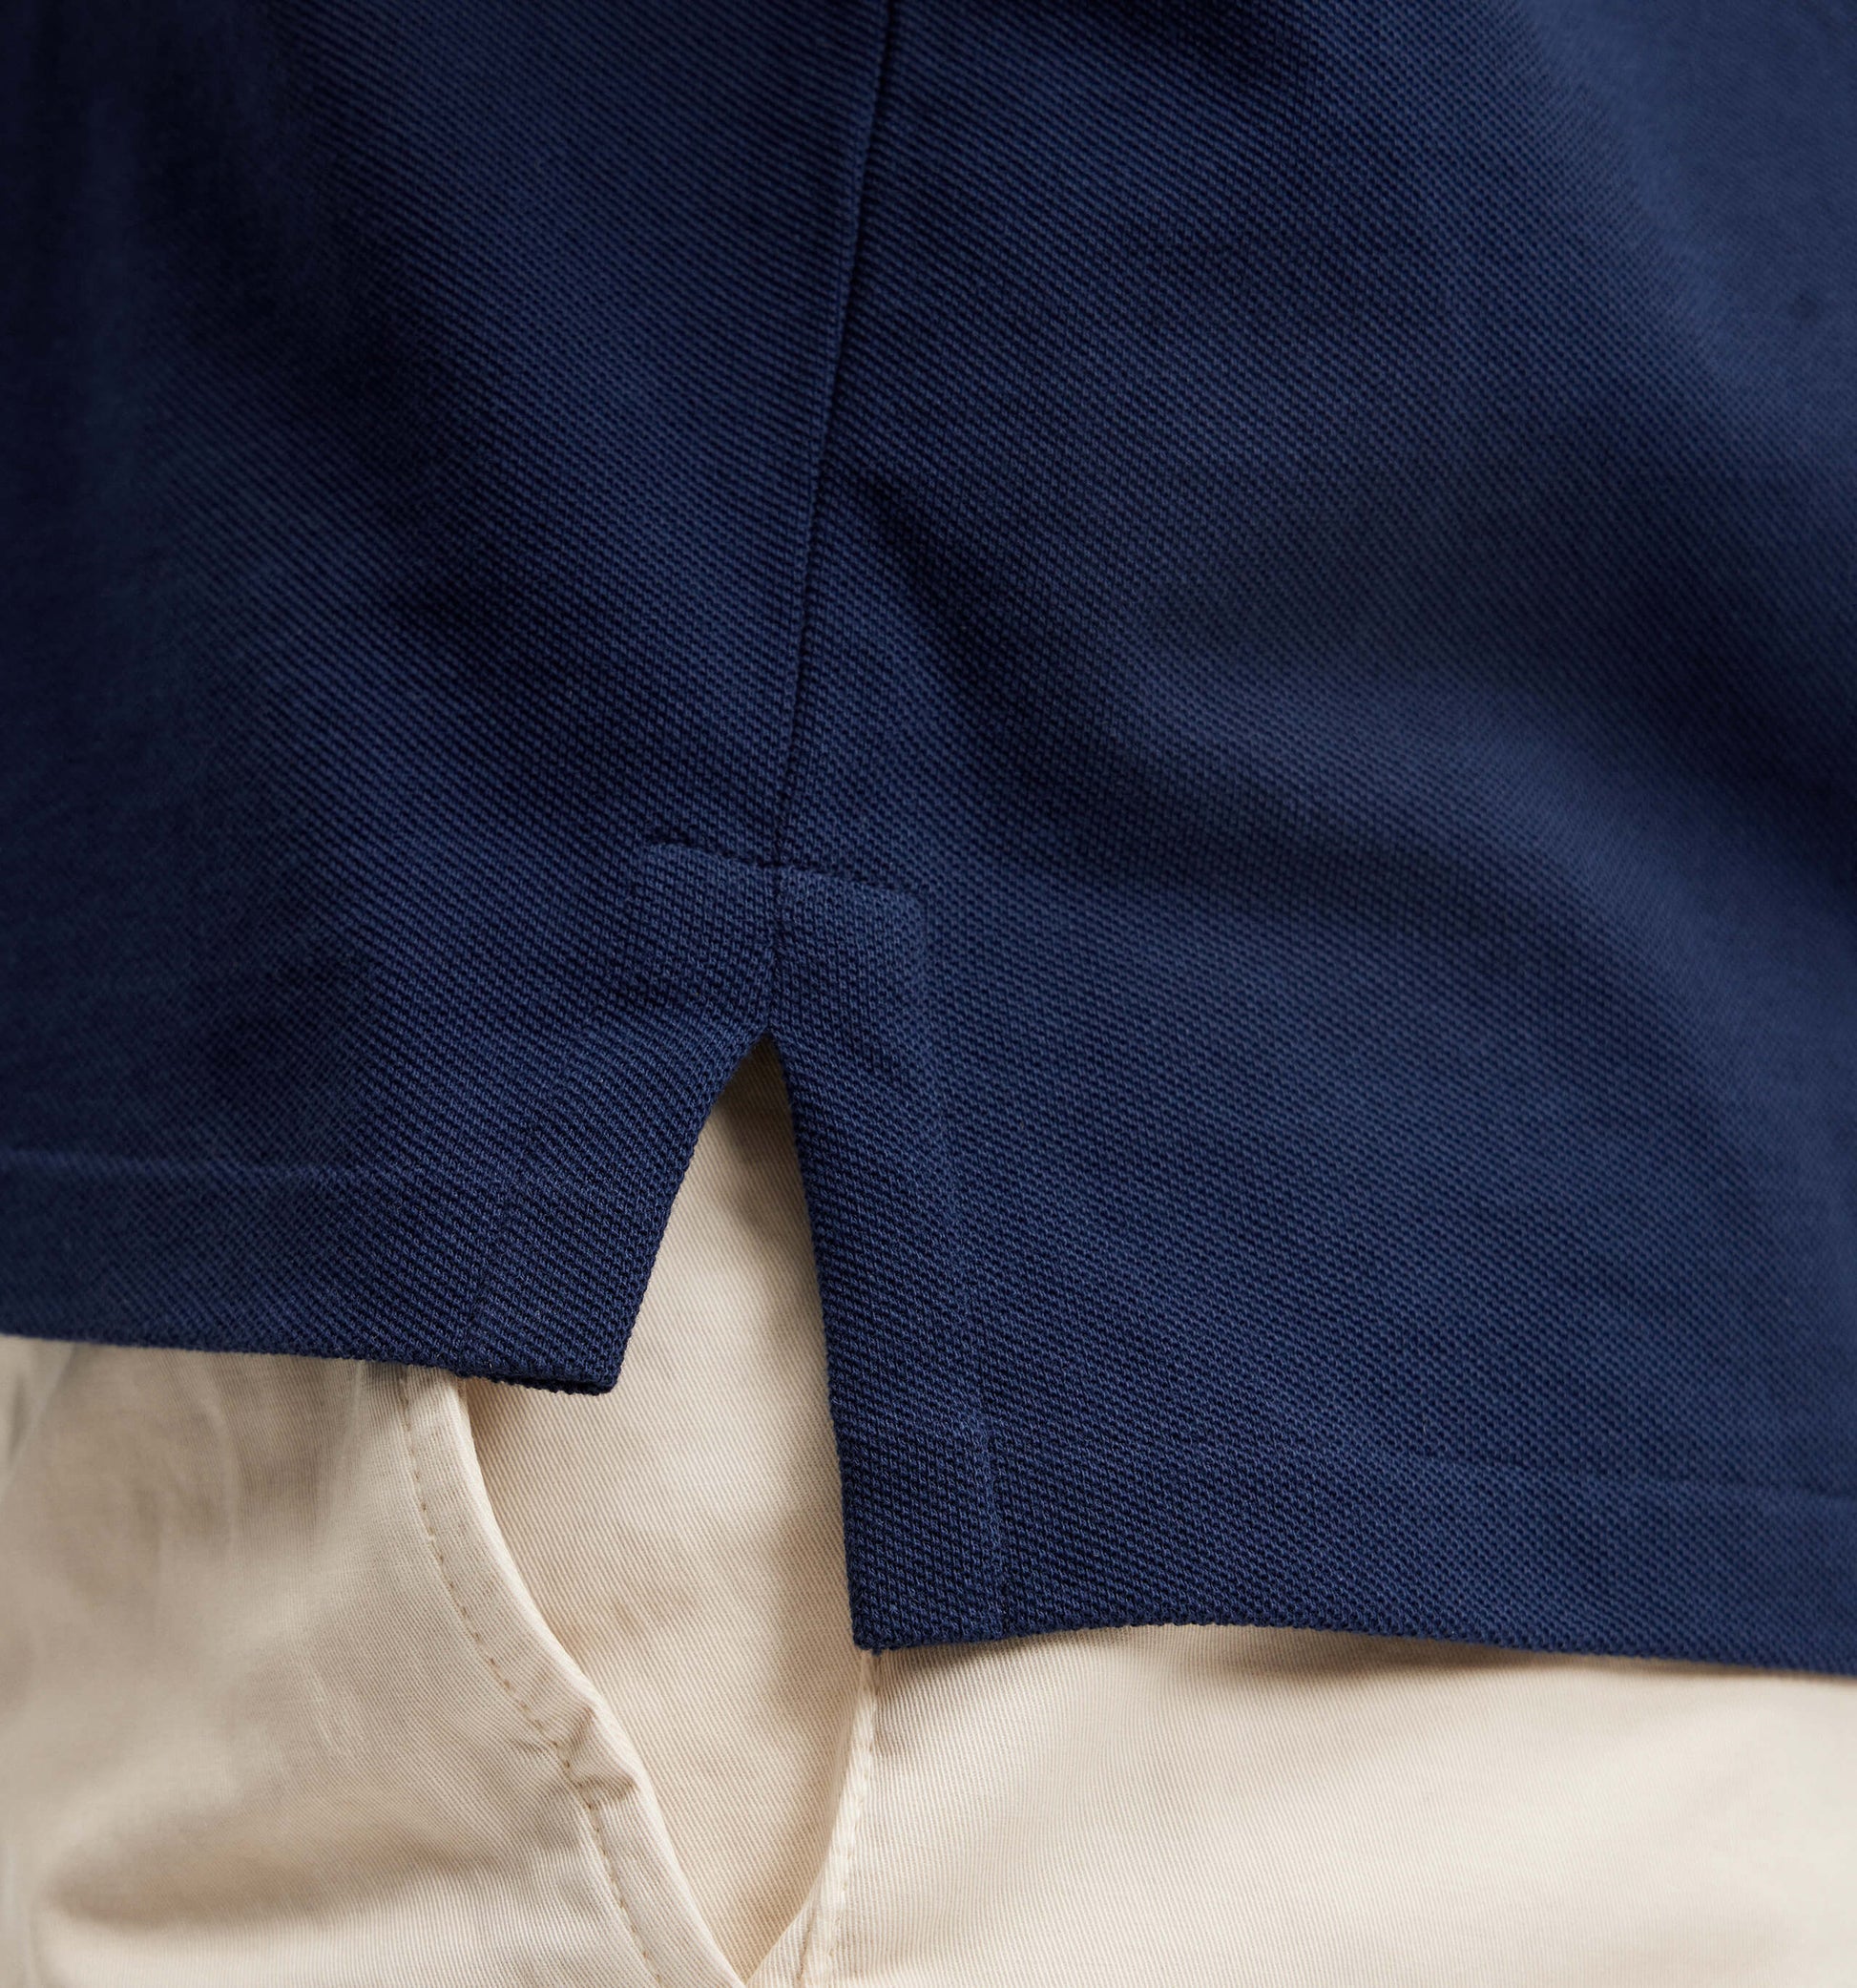 The Rene - Pique Polo In Navy From King Essentials